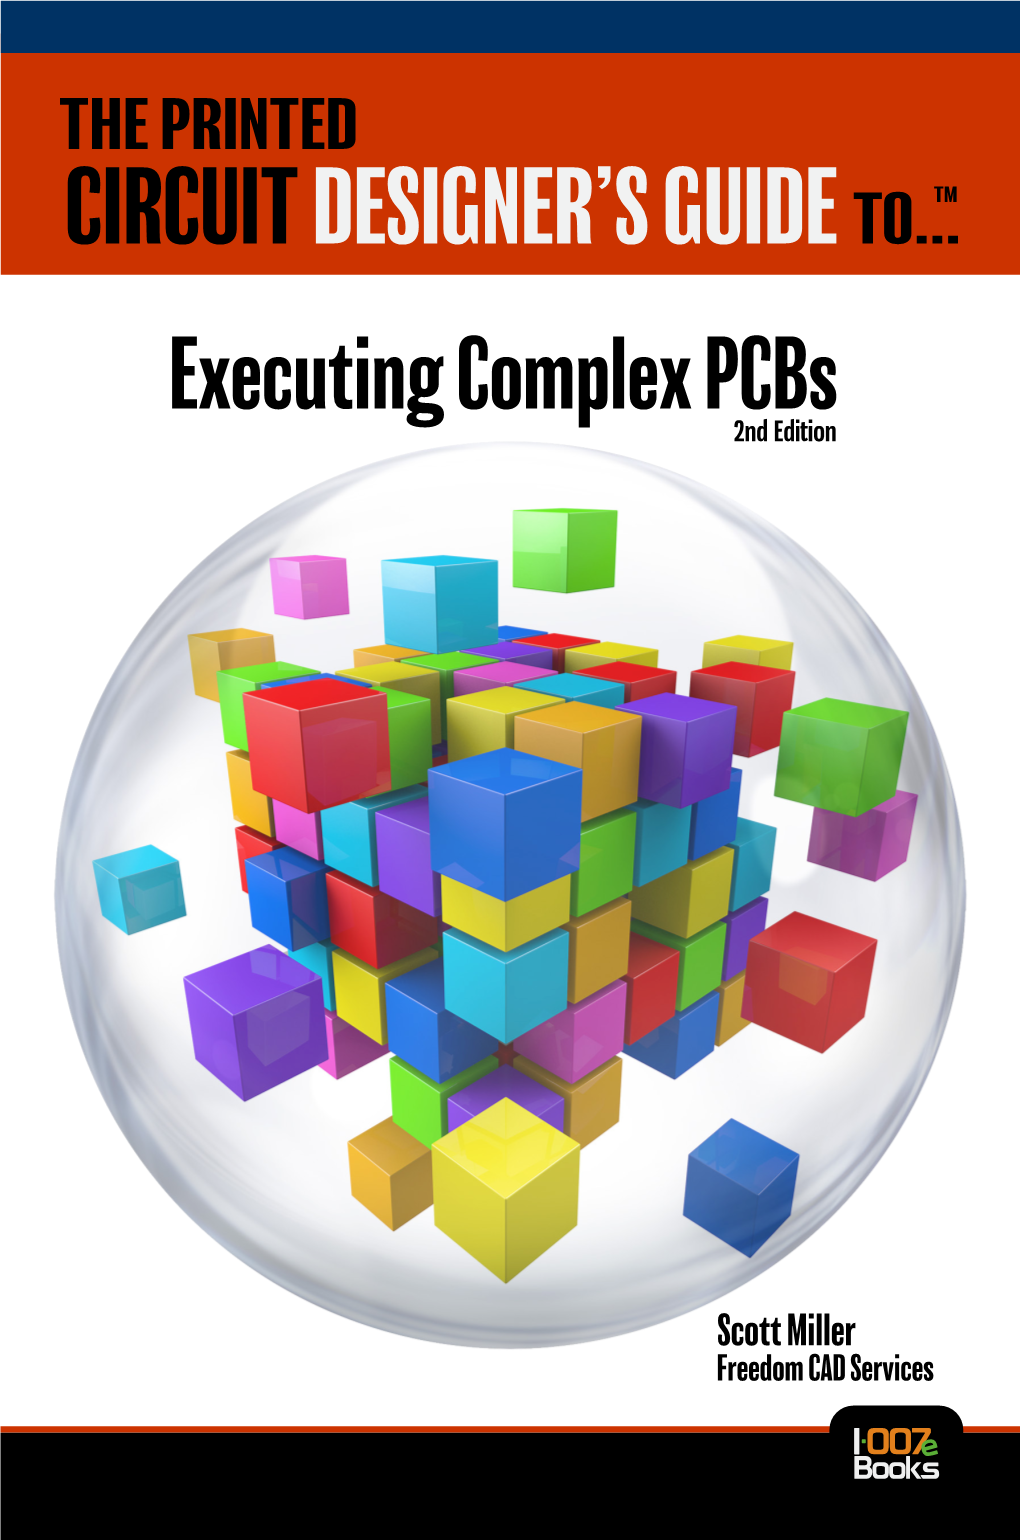 The Printed Circuit Designer's Guide To... Executing